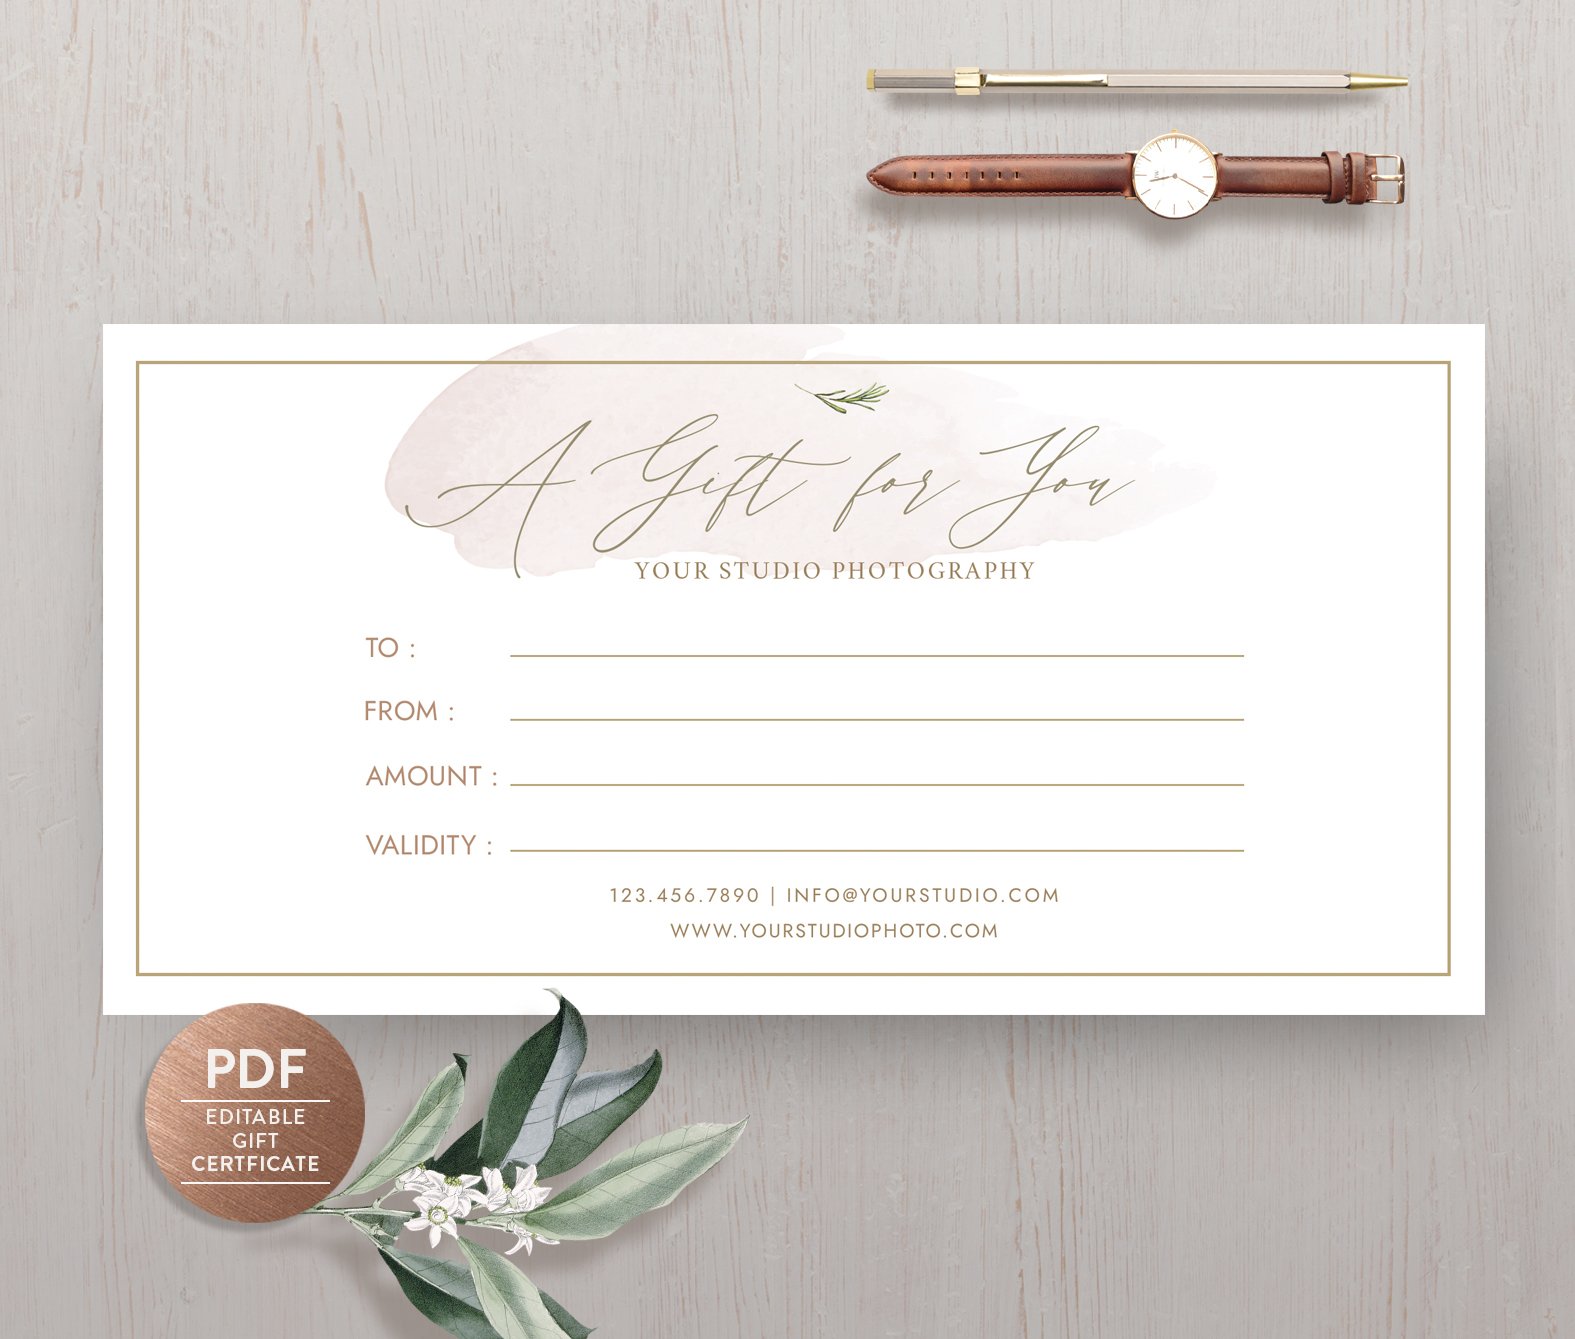 Editable PDF Gift Certificate GC007 cover image.